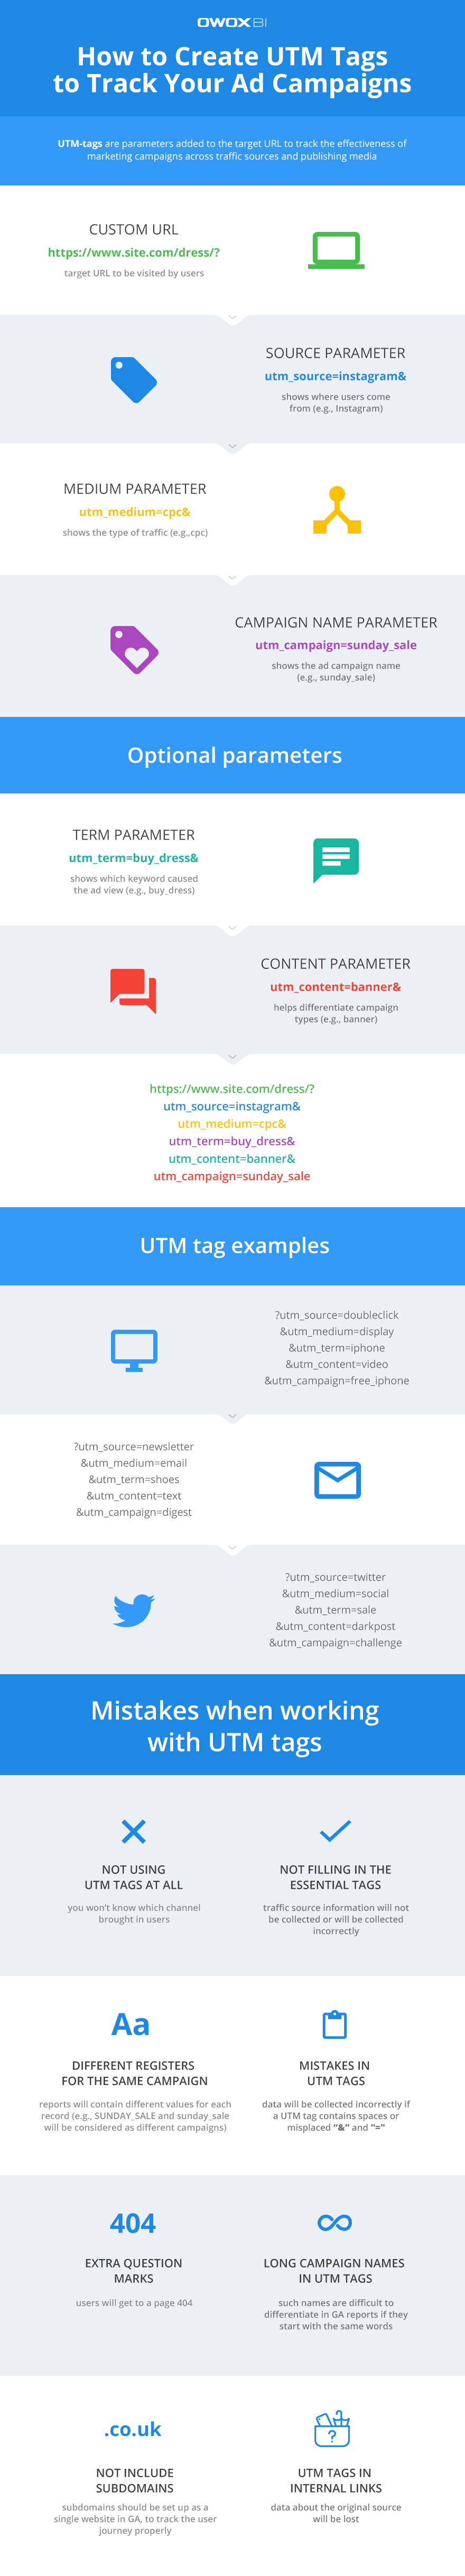 infographic to help you create UTM tags